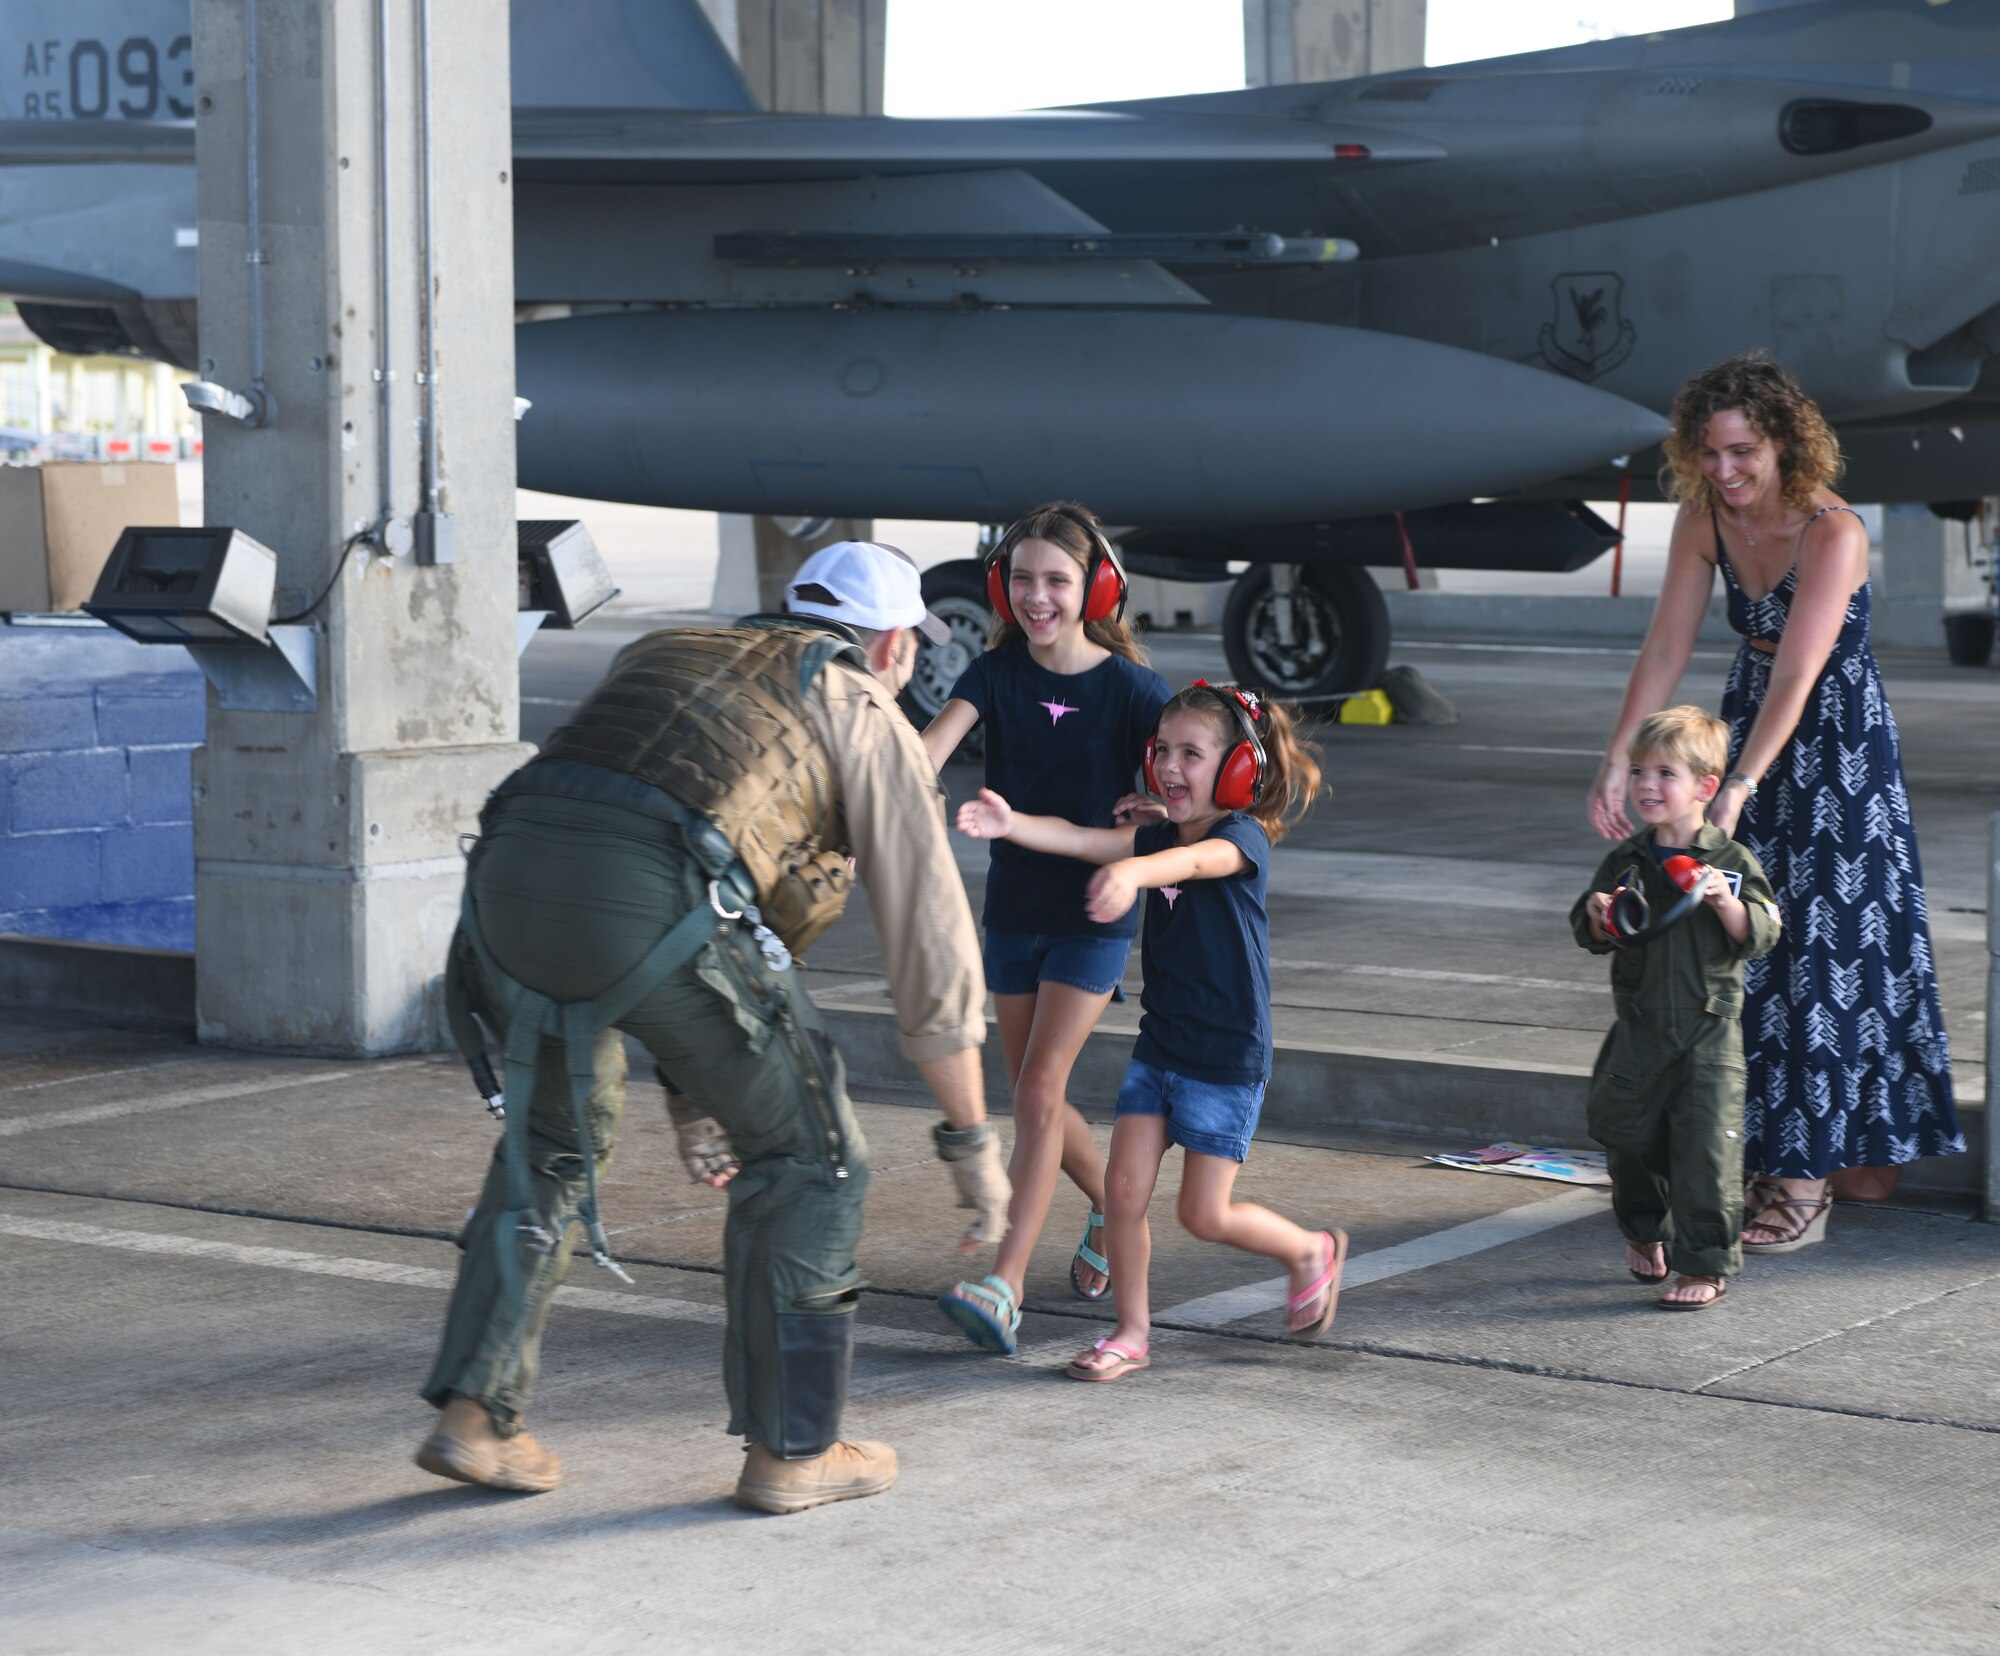 U.S. Air Force Maj. Jonathan Taylor, 44th Fighter Squadron assistant director of operations, is welcomed back from a deployment by his family Oct. 3, 2020, at Kadena Air Base, Japan. While deployed to the U.S. Central Command area of operations, Airmen conducted more than 1,000 sorties and 5,300 combat hours, which drove 13 phase inspections in six months. They’ll now share the skills they learned in combat with Team Kadena, joint partners and allies to ensure a free and open Indo-Pacific. (U.S. Air Force photo by Tech. Sgt. Benjamin Sutton)